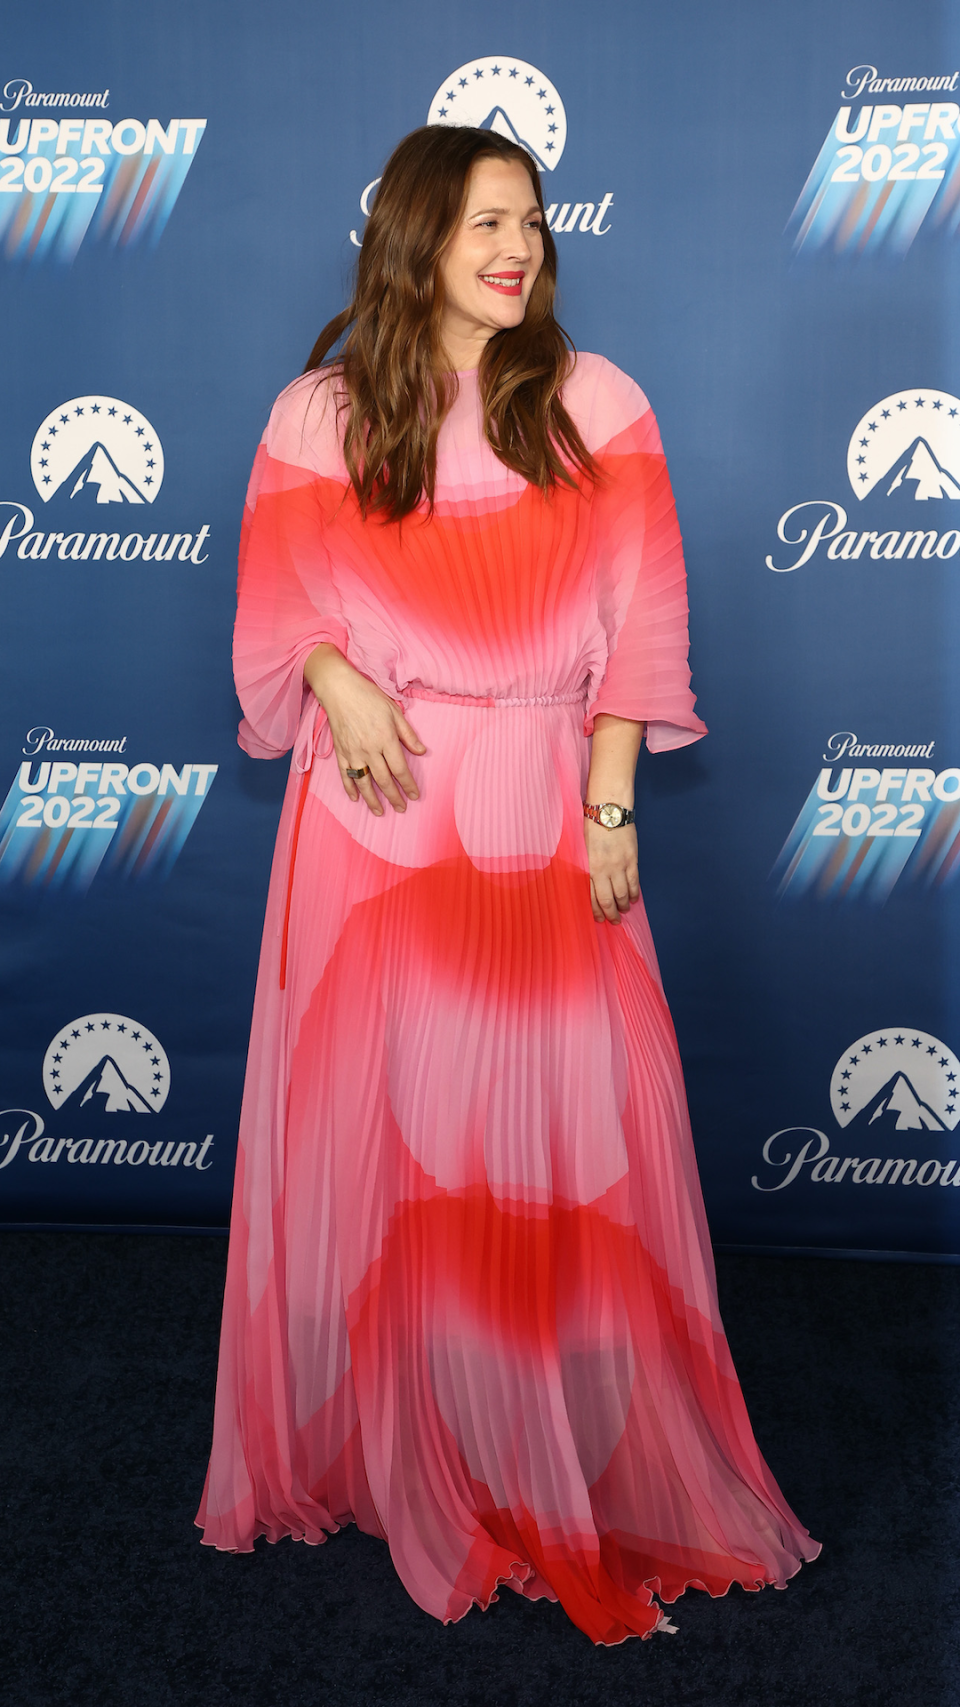 Drew Barrymore attends the 2022 Paramount Upfront at 666 Madison Avenue on May 18, 2022 in New York City